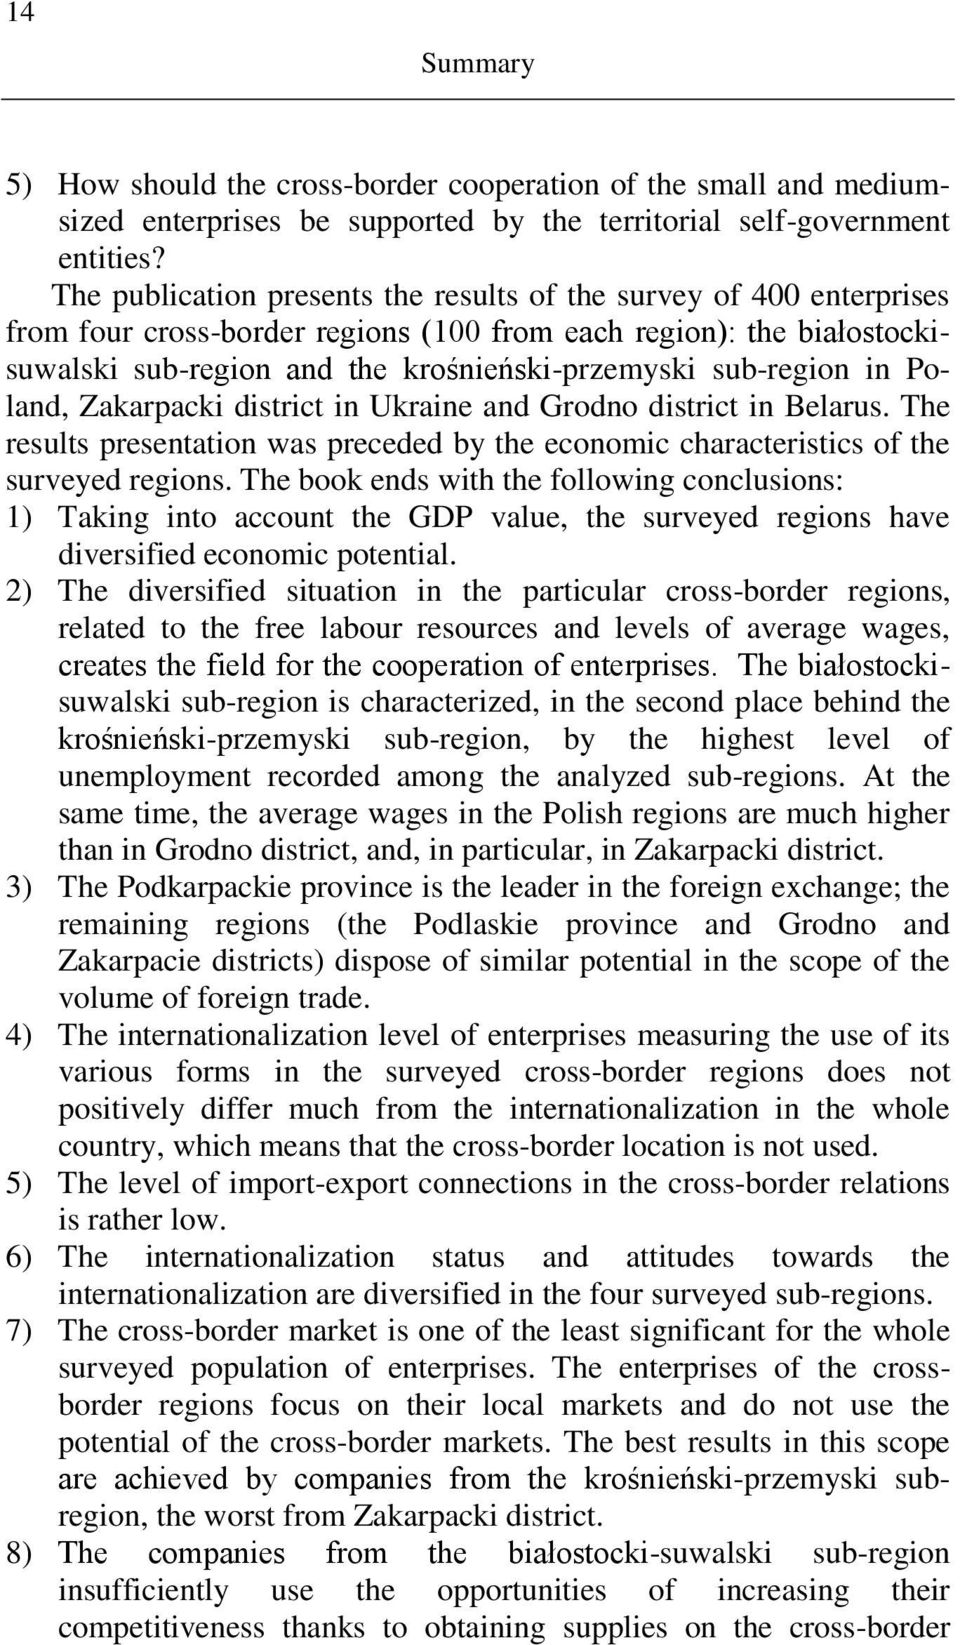 sub-region in Poland, Zakarpacki district in Ukraine and Grodno district in Belarus. The results presentation was preceded by the economic characteristics of the surveyed regions.